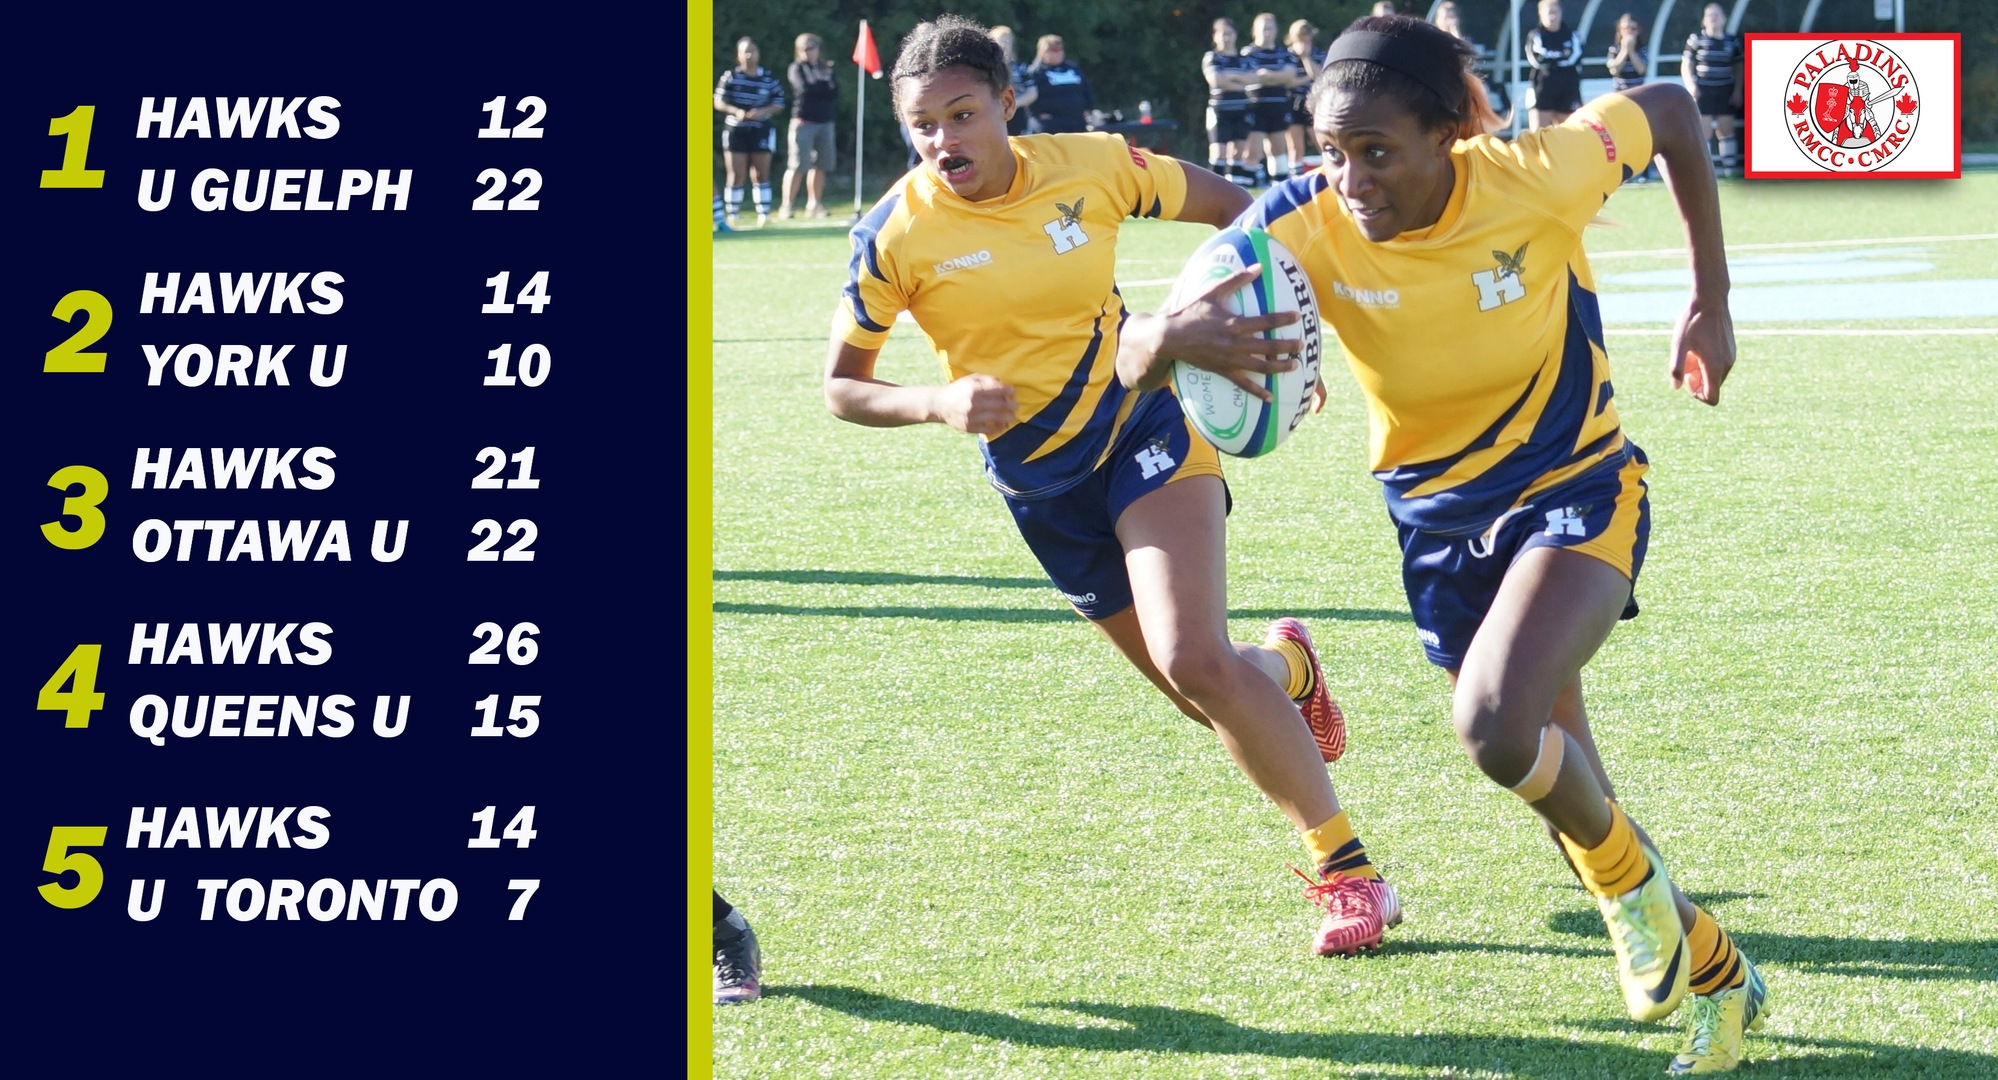 HAWKS WOMEN'S RUGBY 7'S  IMPRESS AT RMC INVITATIONAL